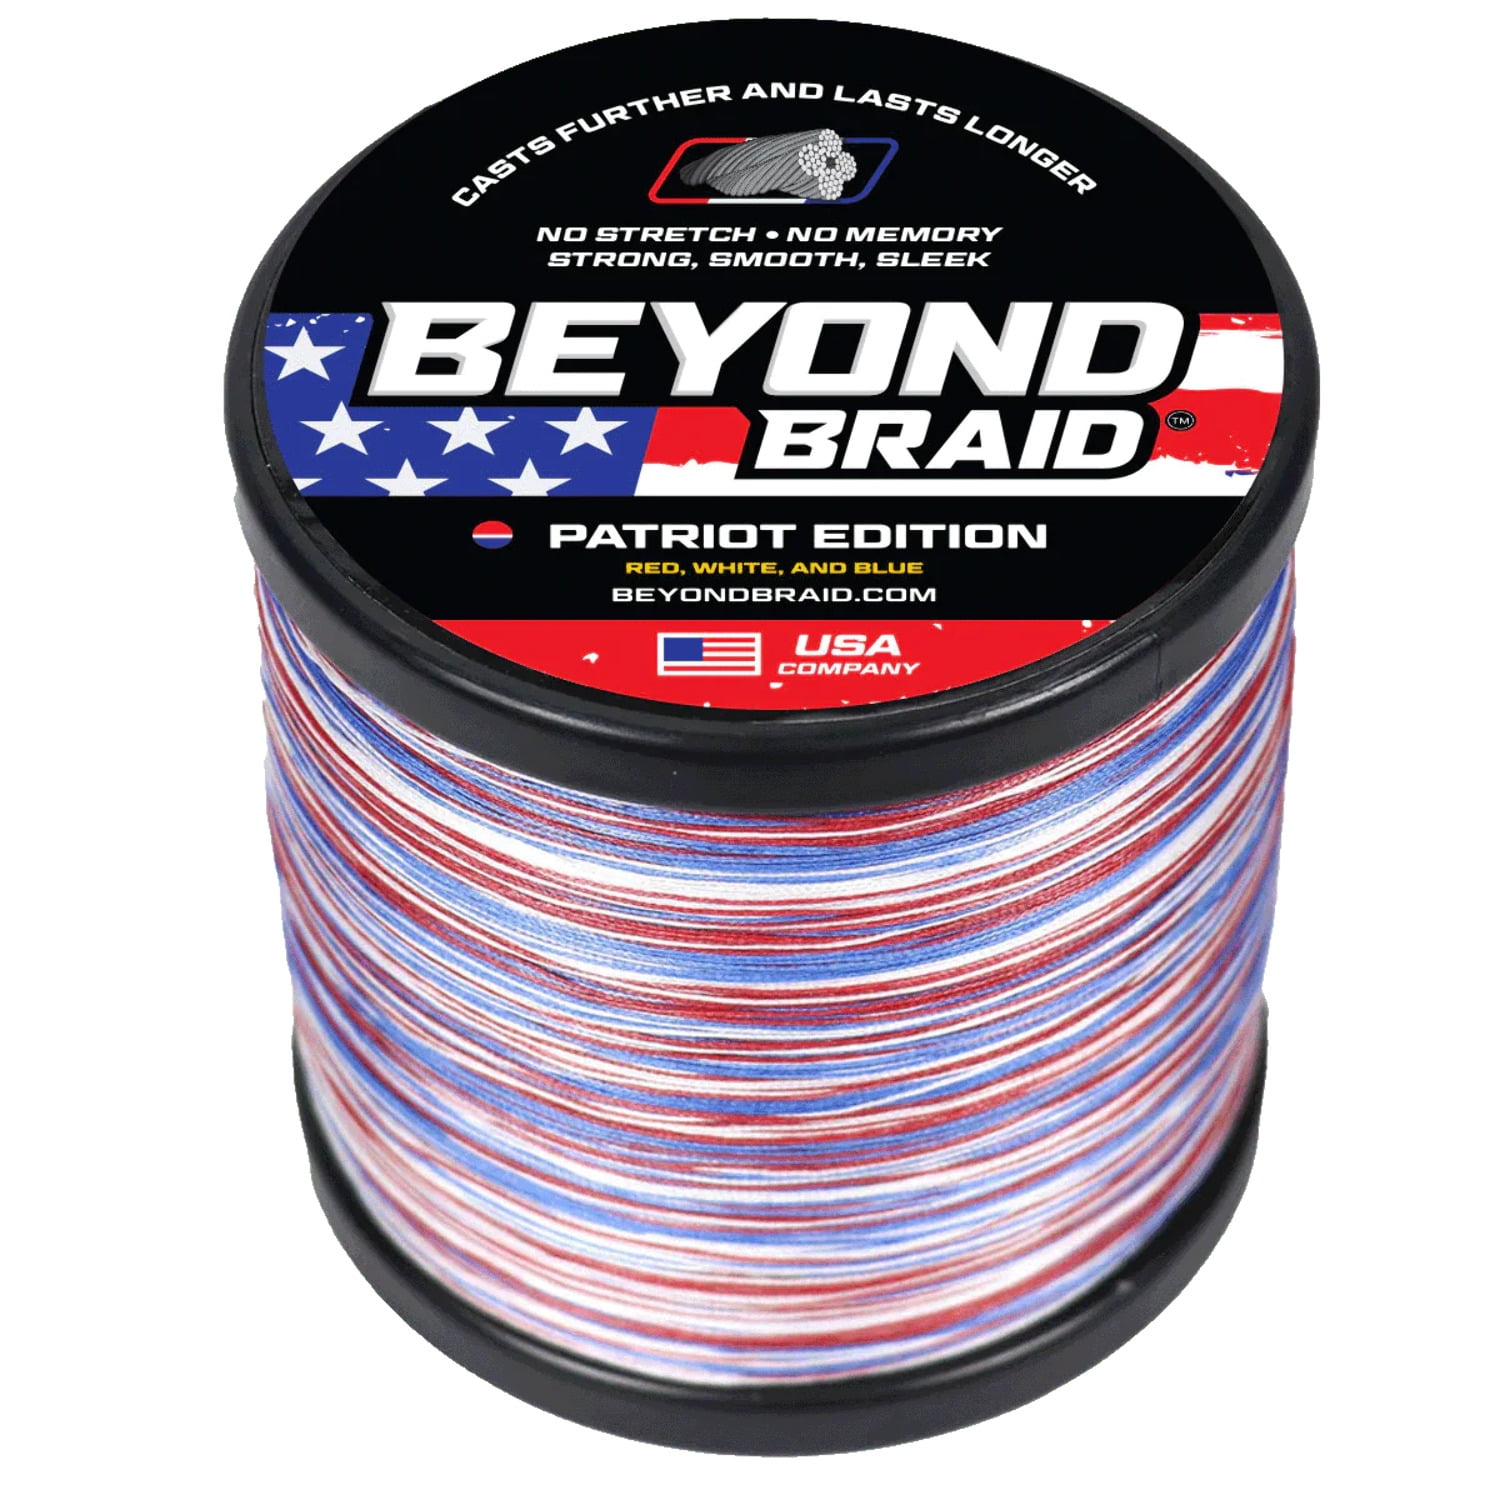 Beyond Braid Braided Fishing Line - Abrasion Resistant - No Stretch - Super  Strong - Thin Diameter SuperLine- Camo - 4 Strand & 8 Strand Braided Line ( White 8X, 50LB 2000 (Yards)) 